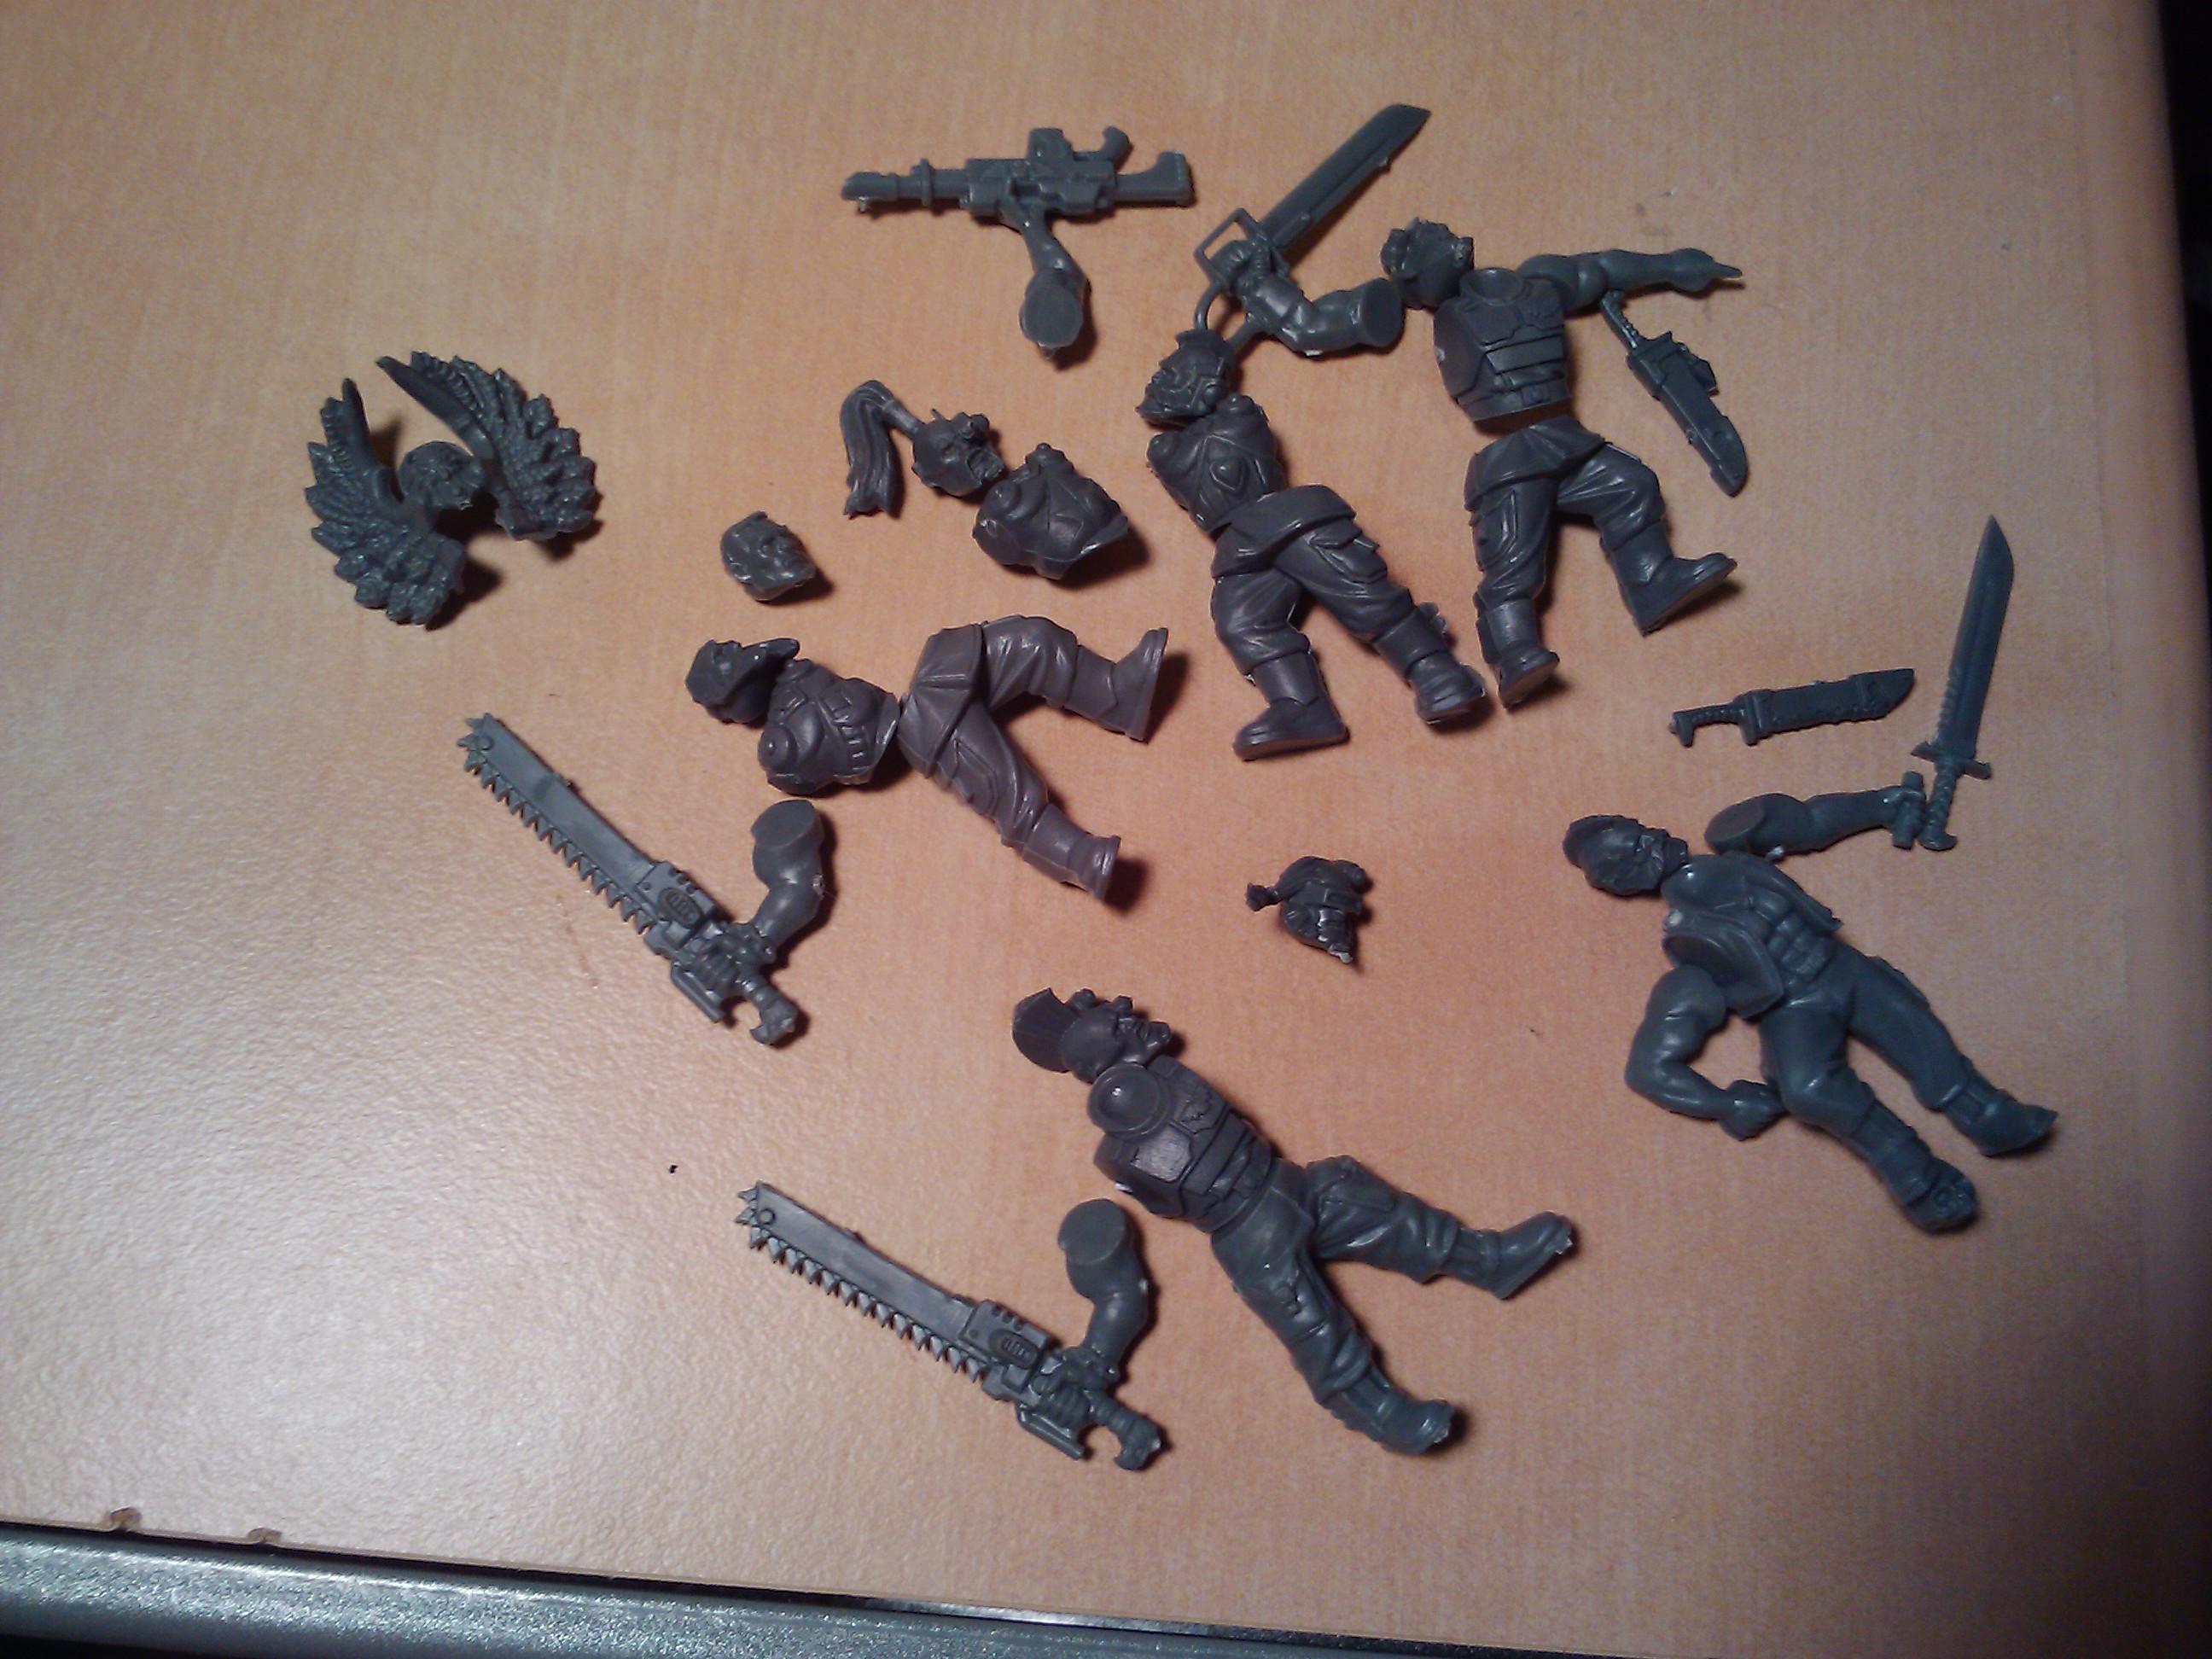 Bits, Cadians, Catachan, Conversion, Fenris, High Elves, Hobby Craft, Imperial Guard, Space Wolves, Sw